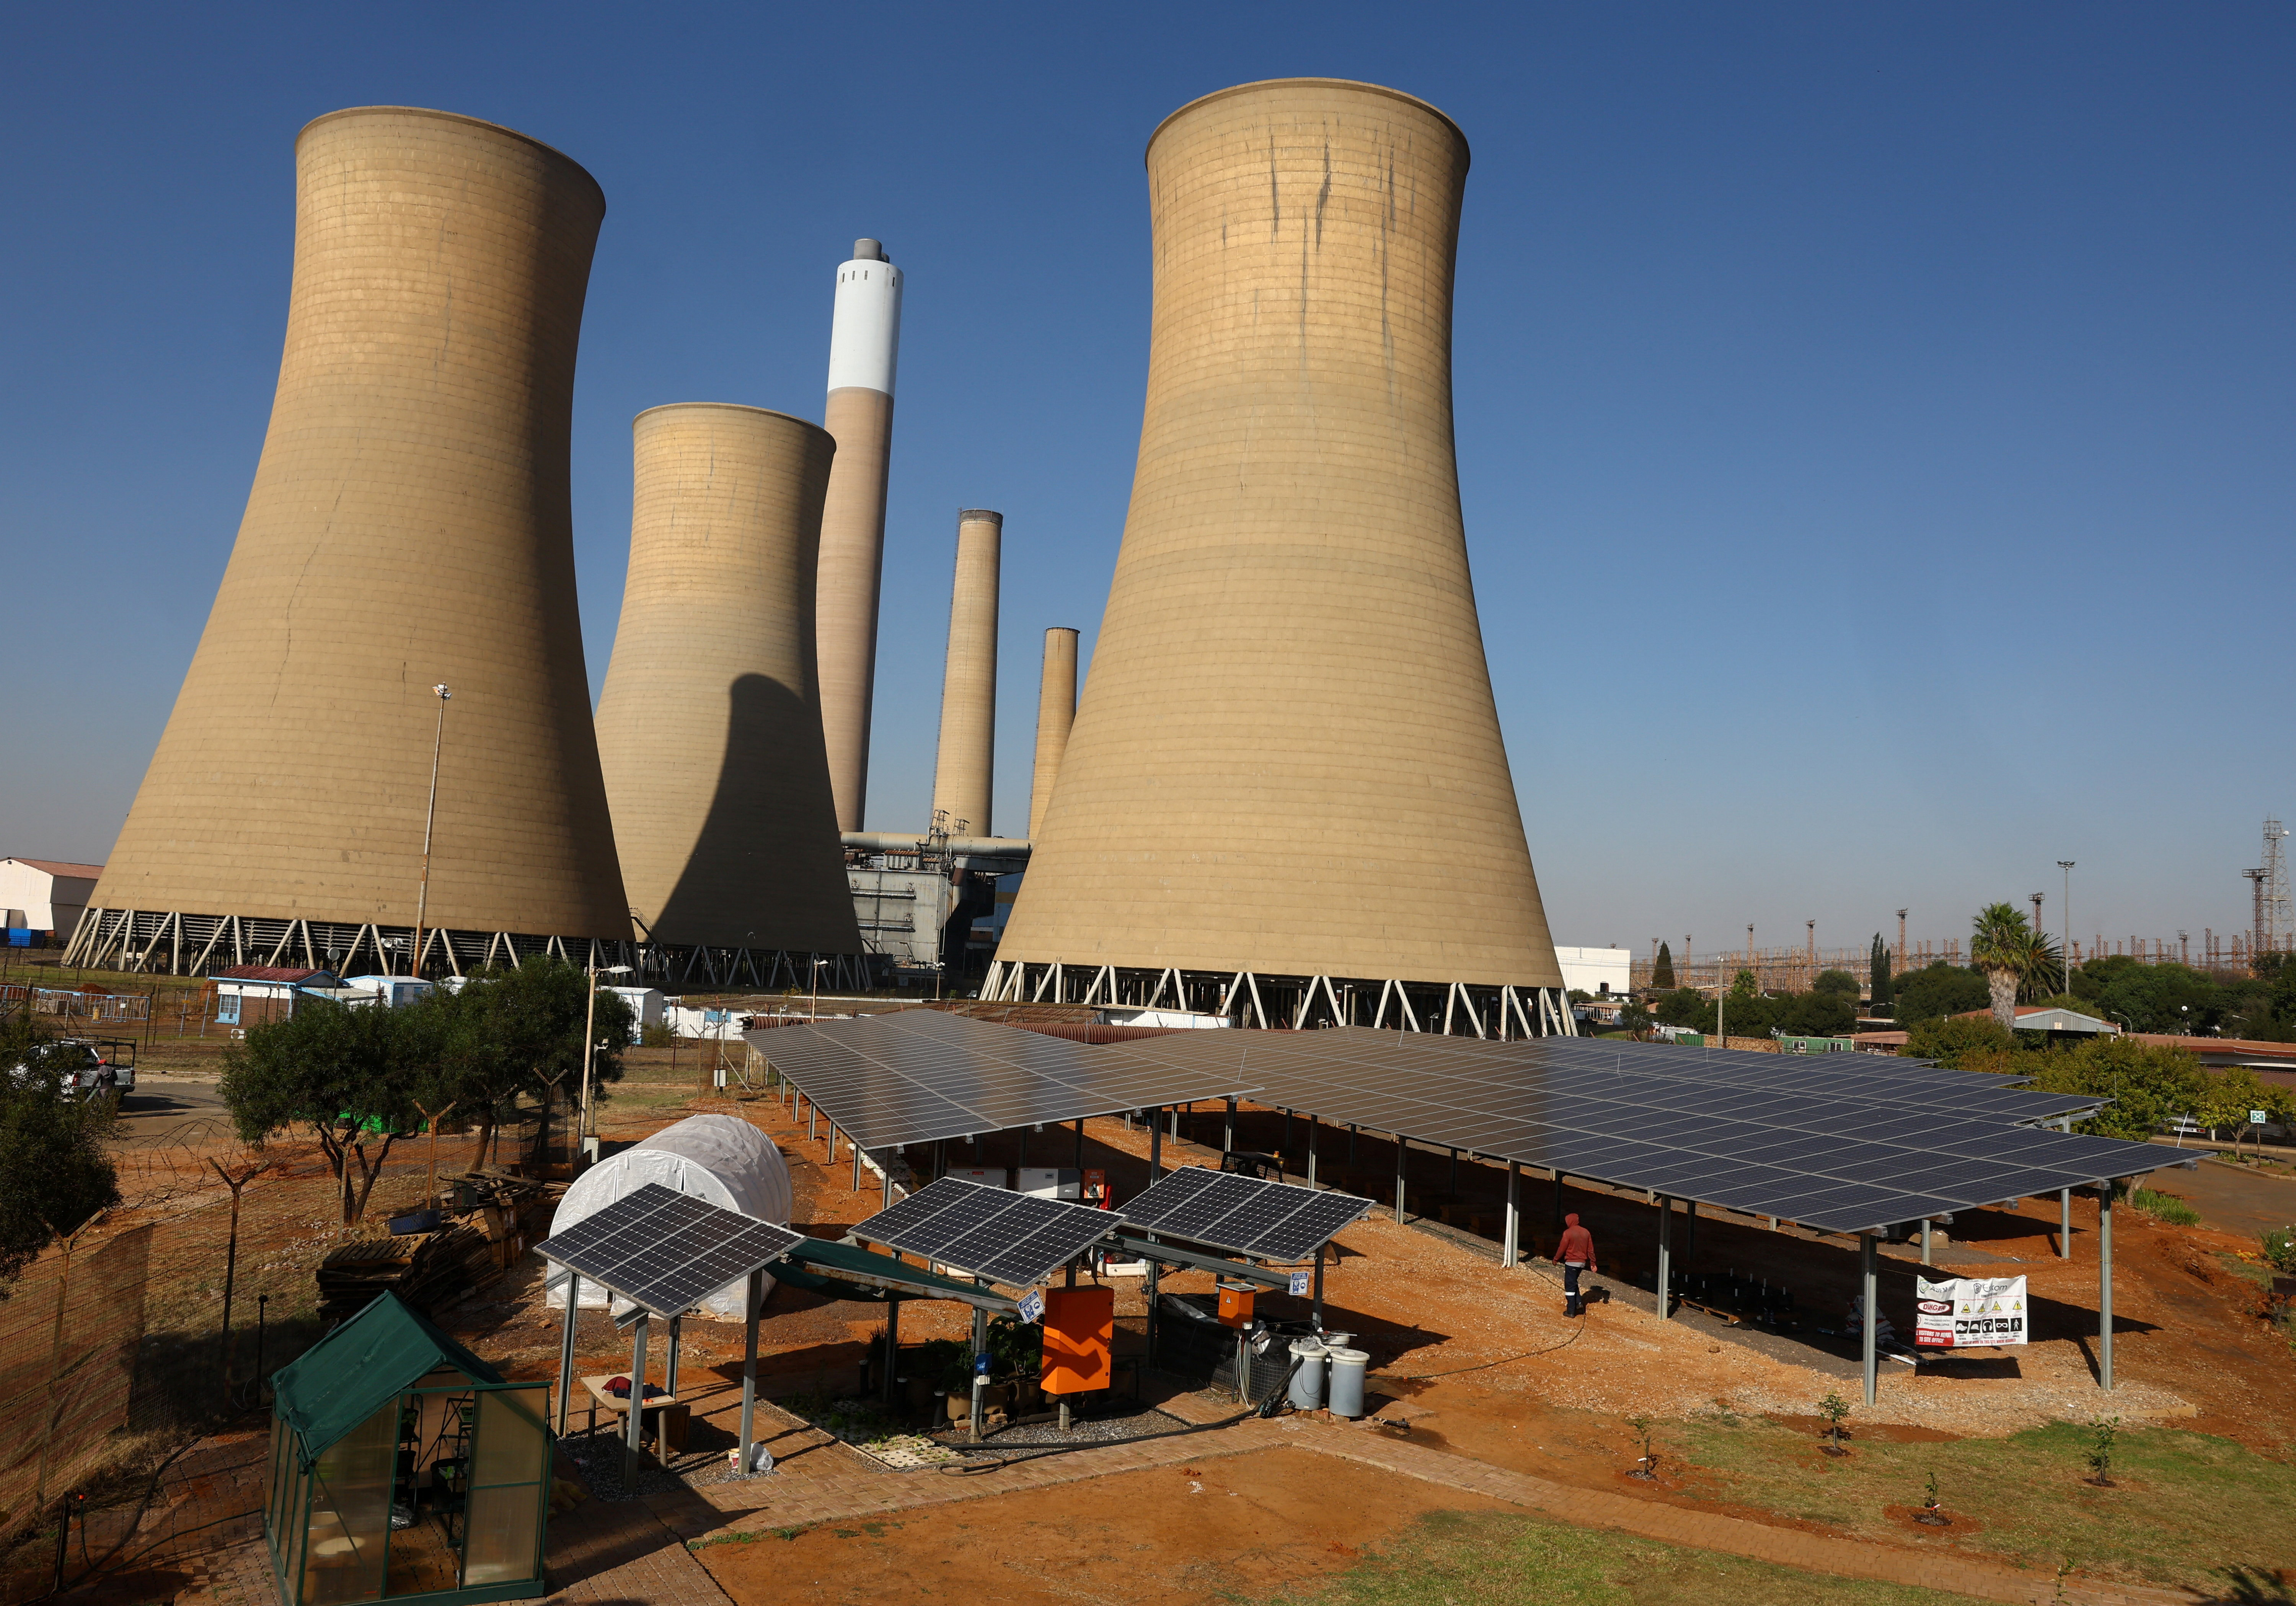 South Africa's ANC walks political tight rope over coal plant shutdowns